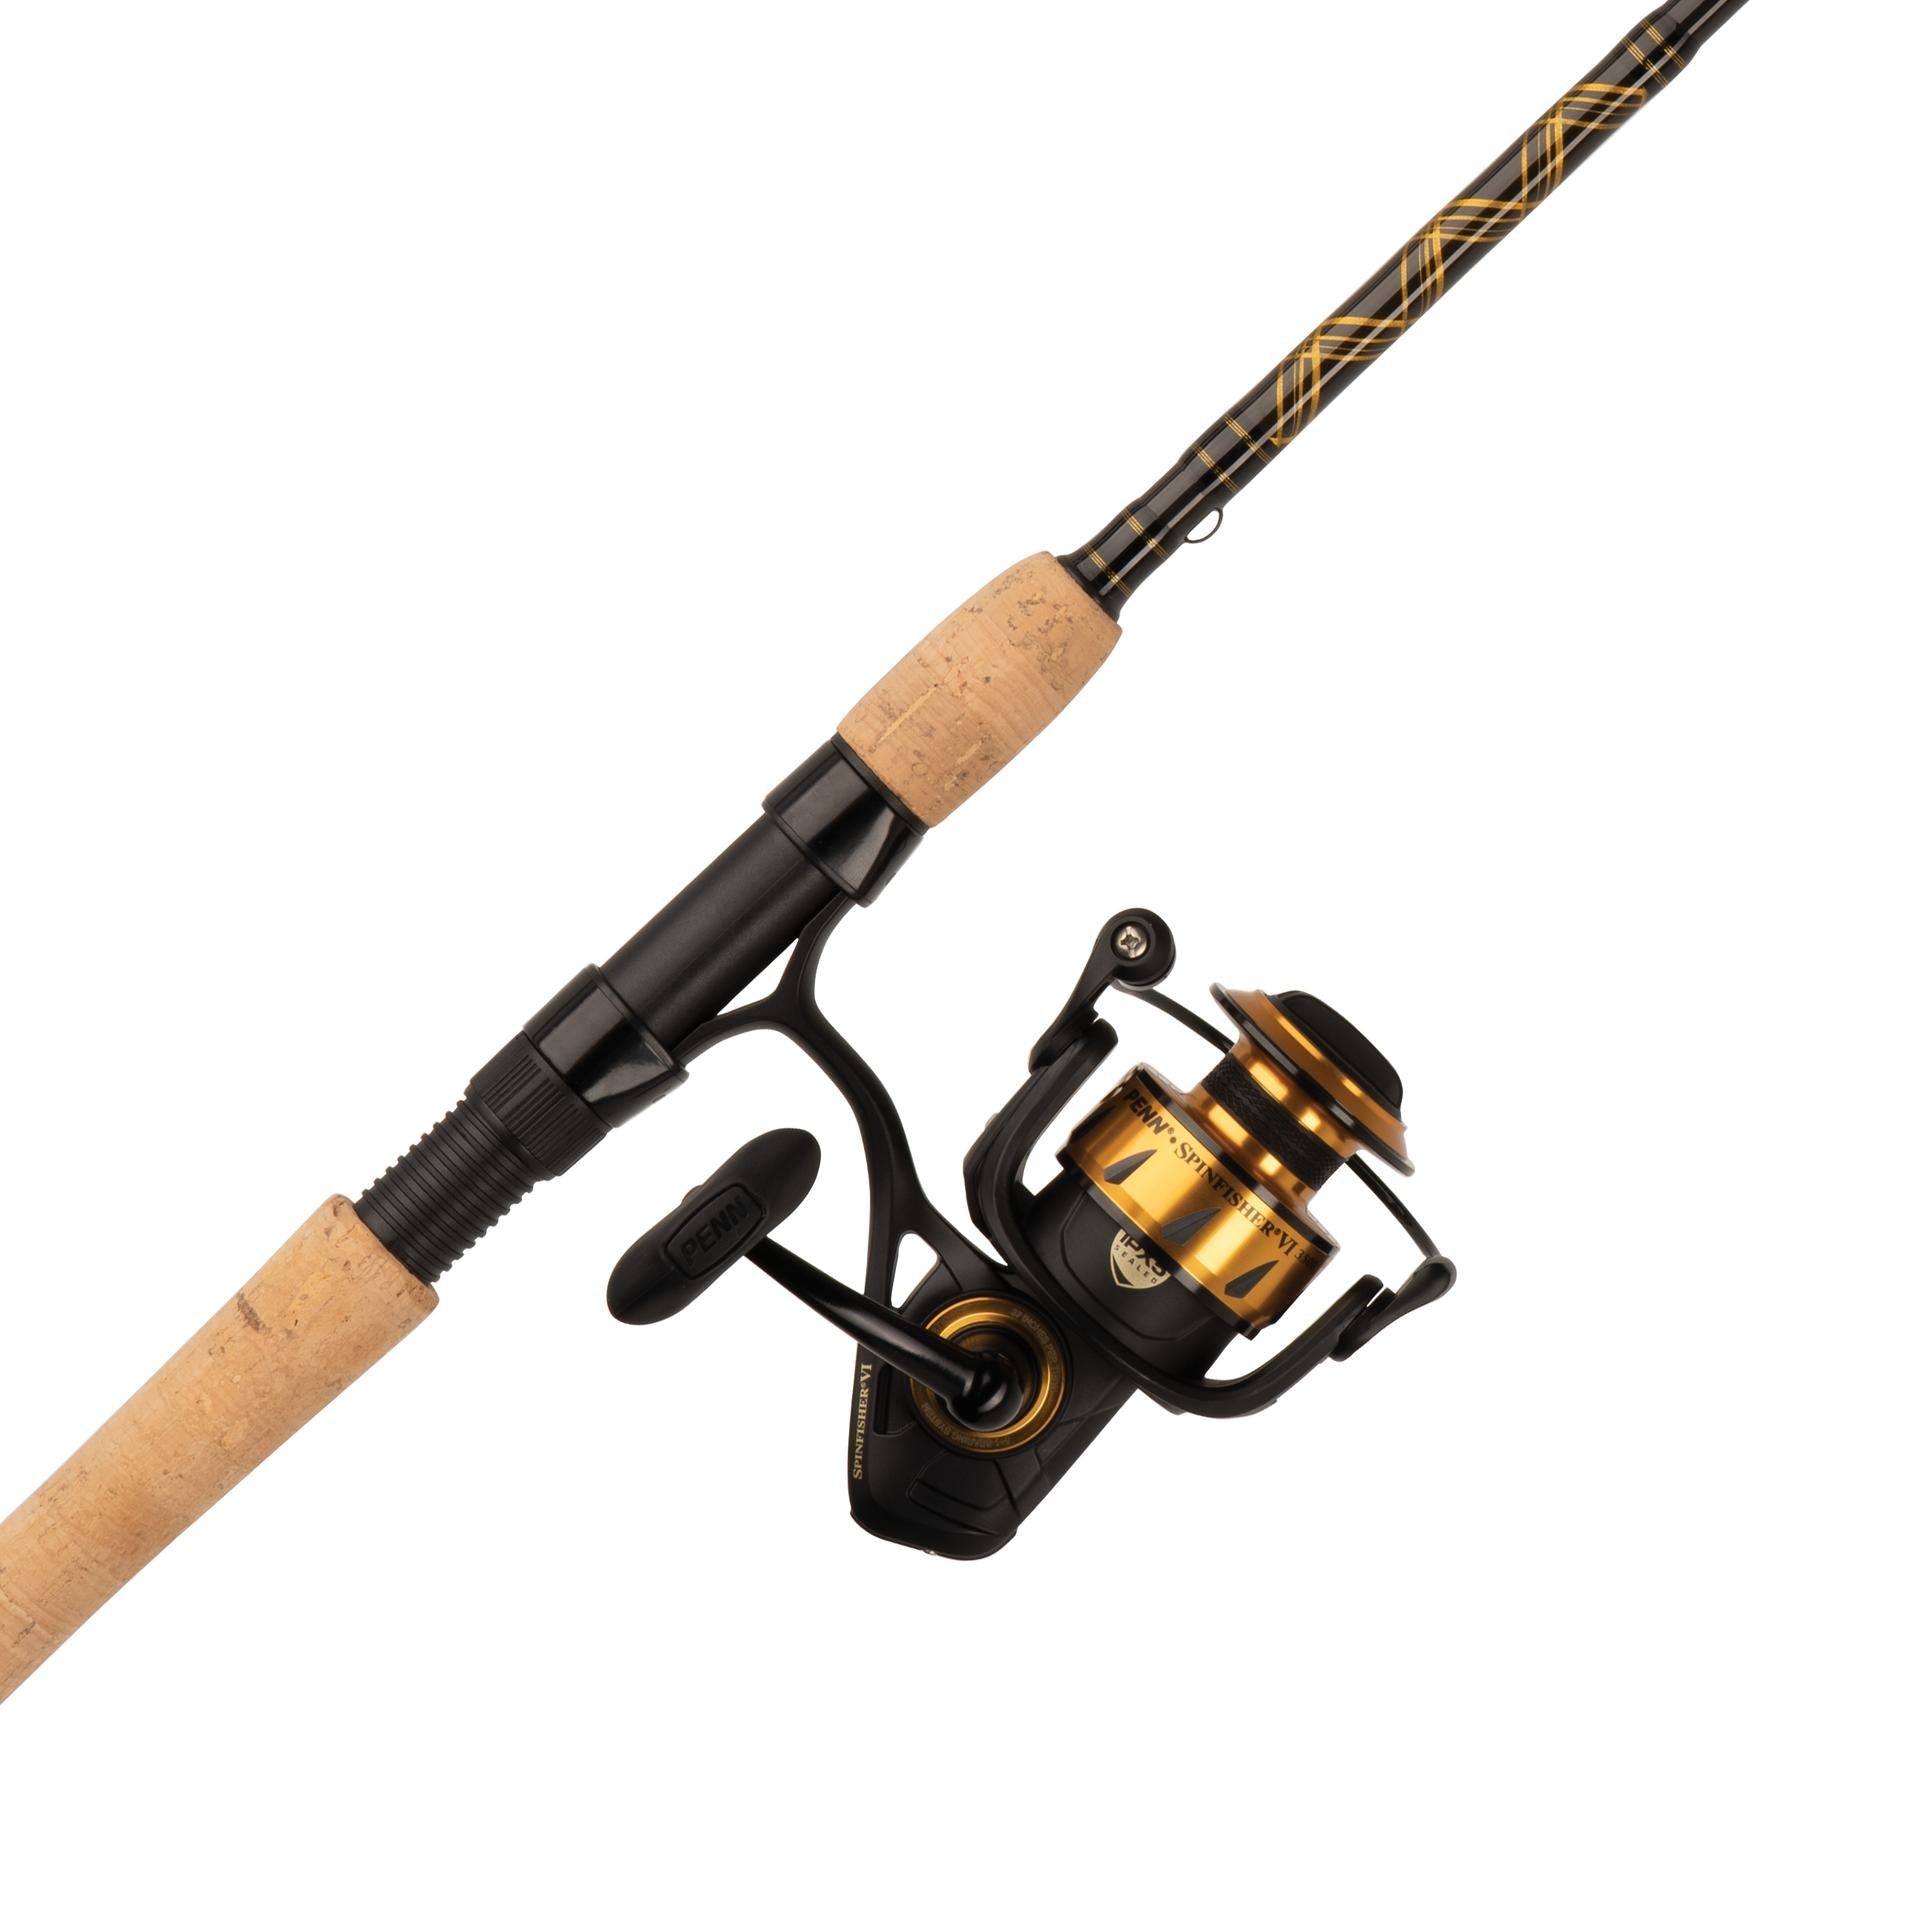 PENN Wrath 9 ft MH Saltwater Spinning Rod and Reel Combo